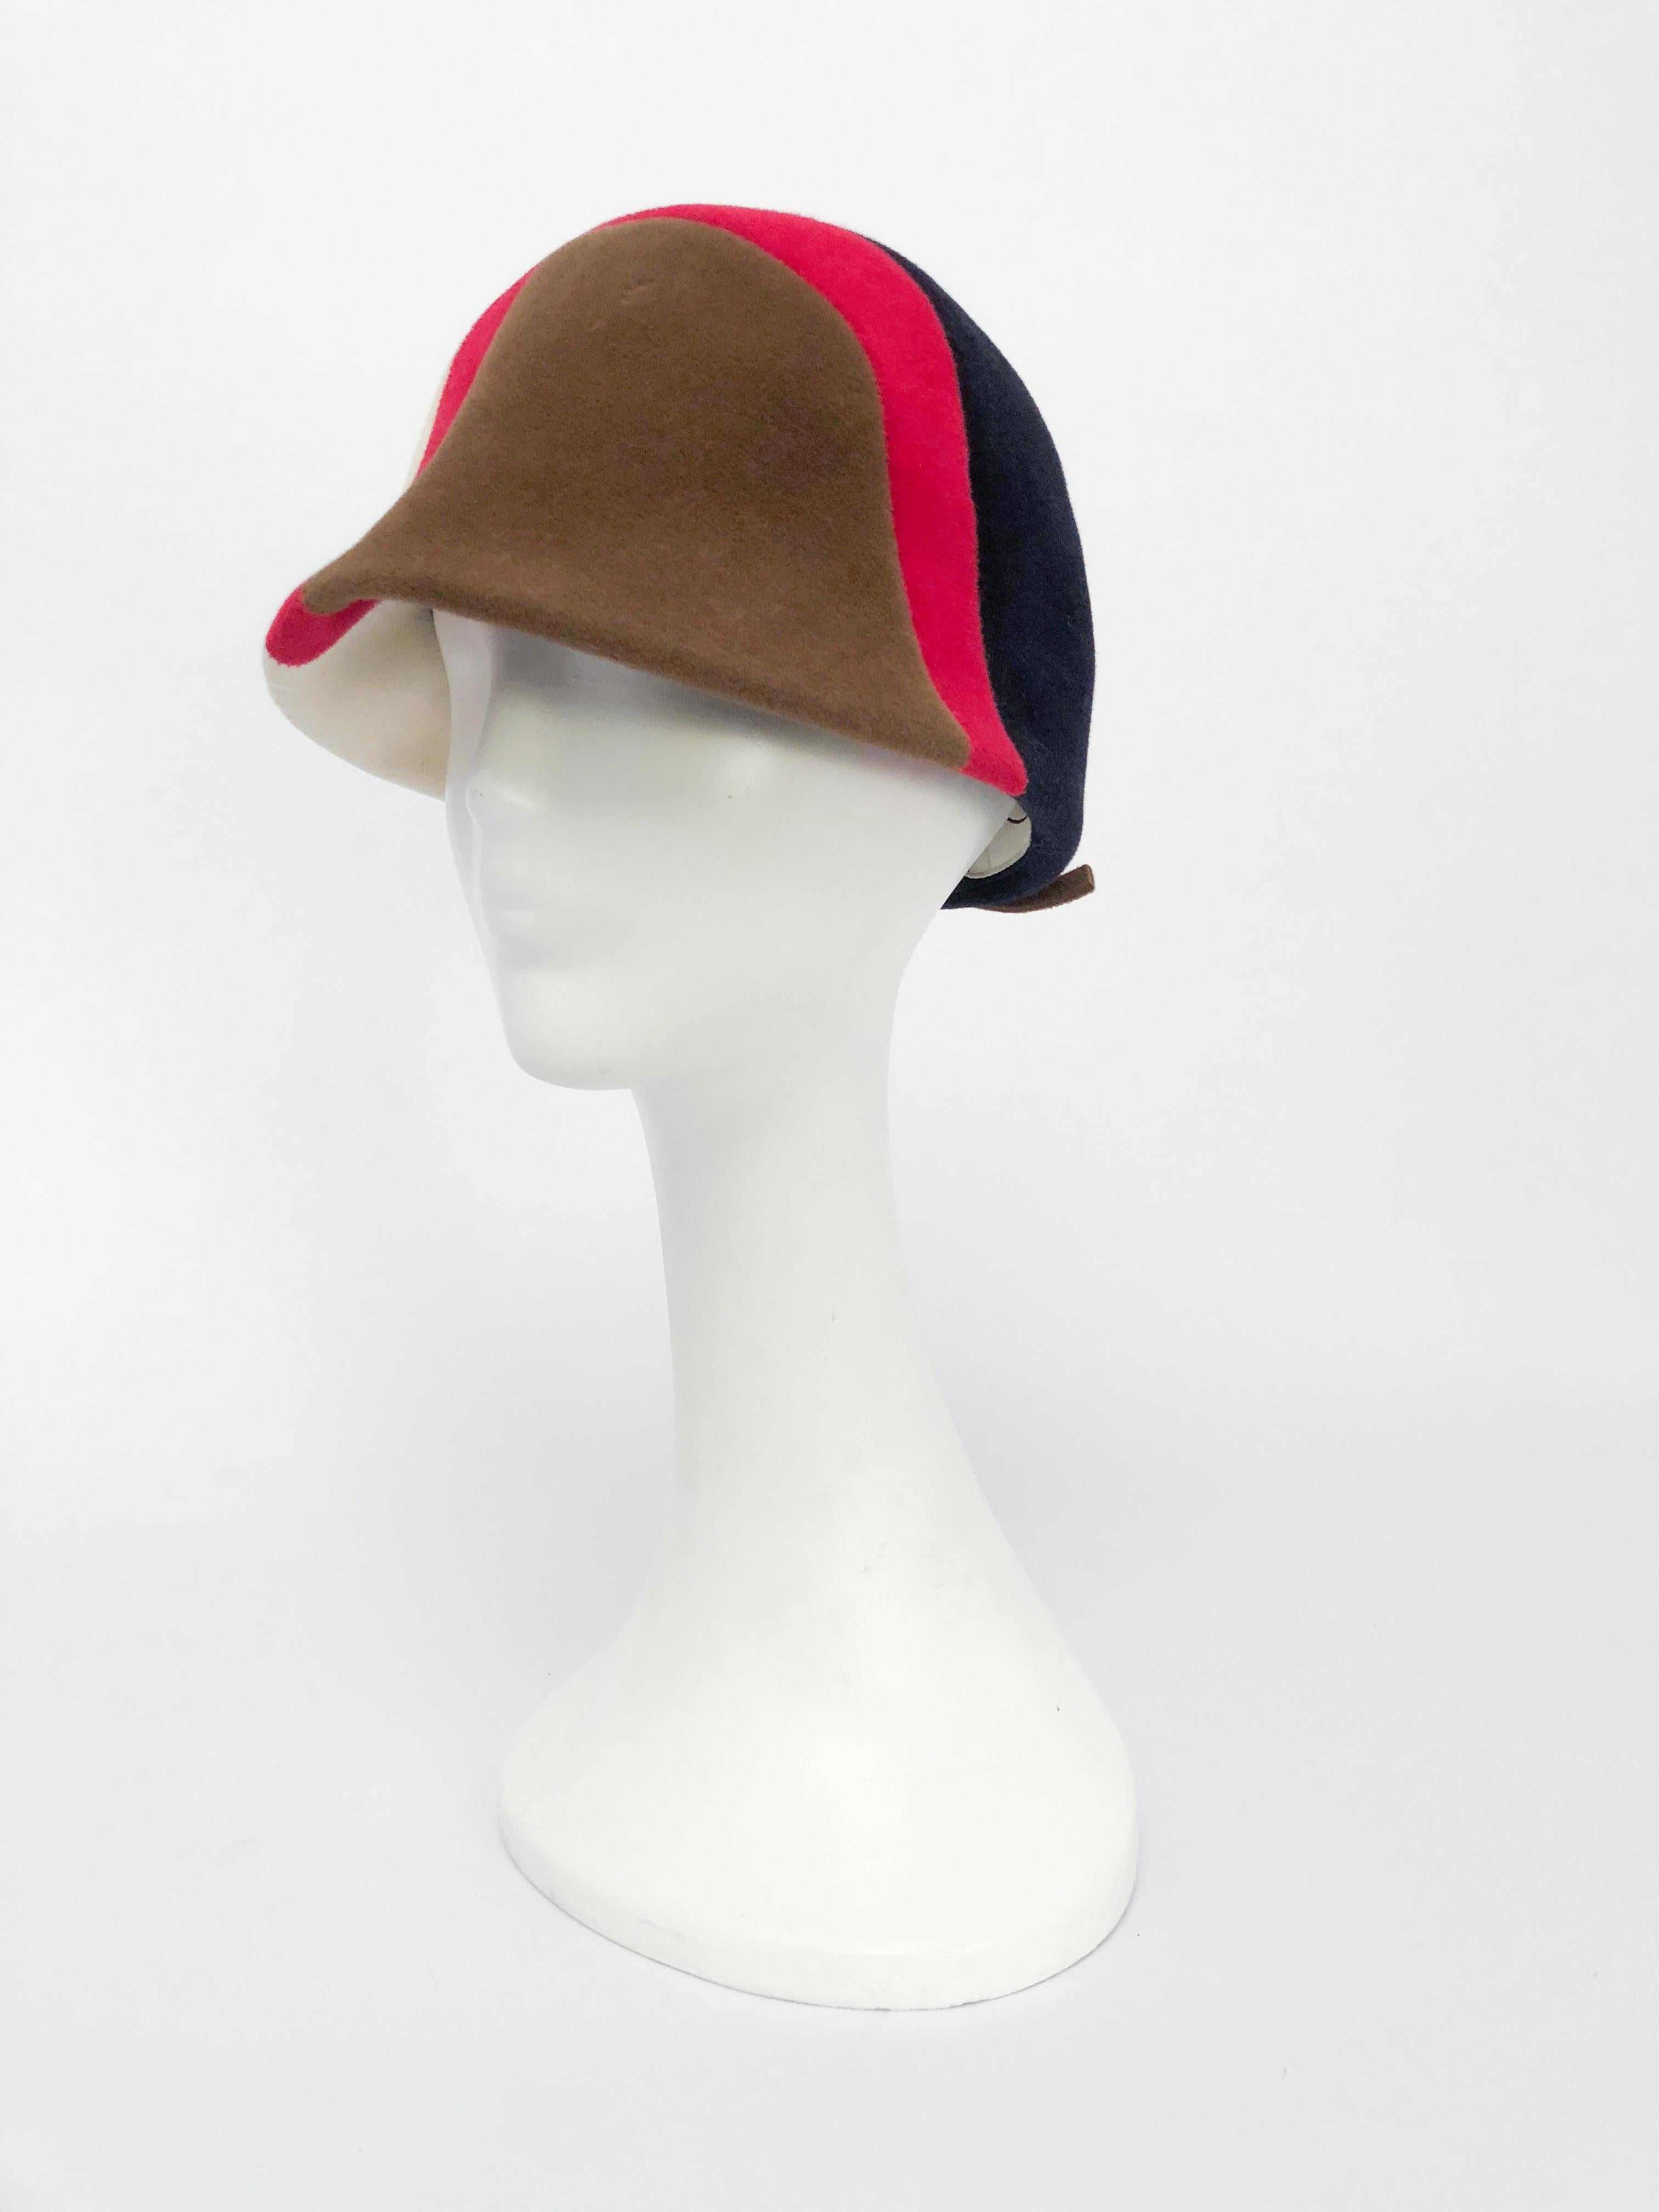 1960s Caroline Mod Hat With Geometric Pattern. Mod hat with Navy, raspberry, cream, and taupe color wave.  